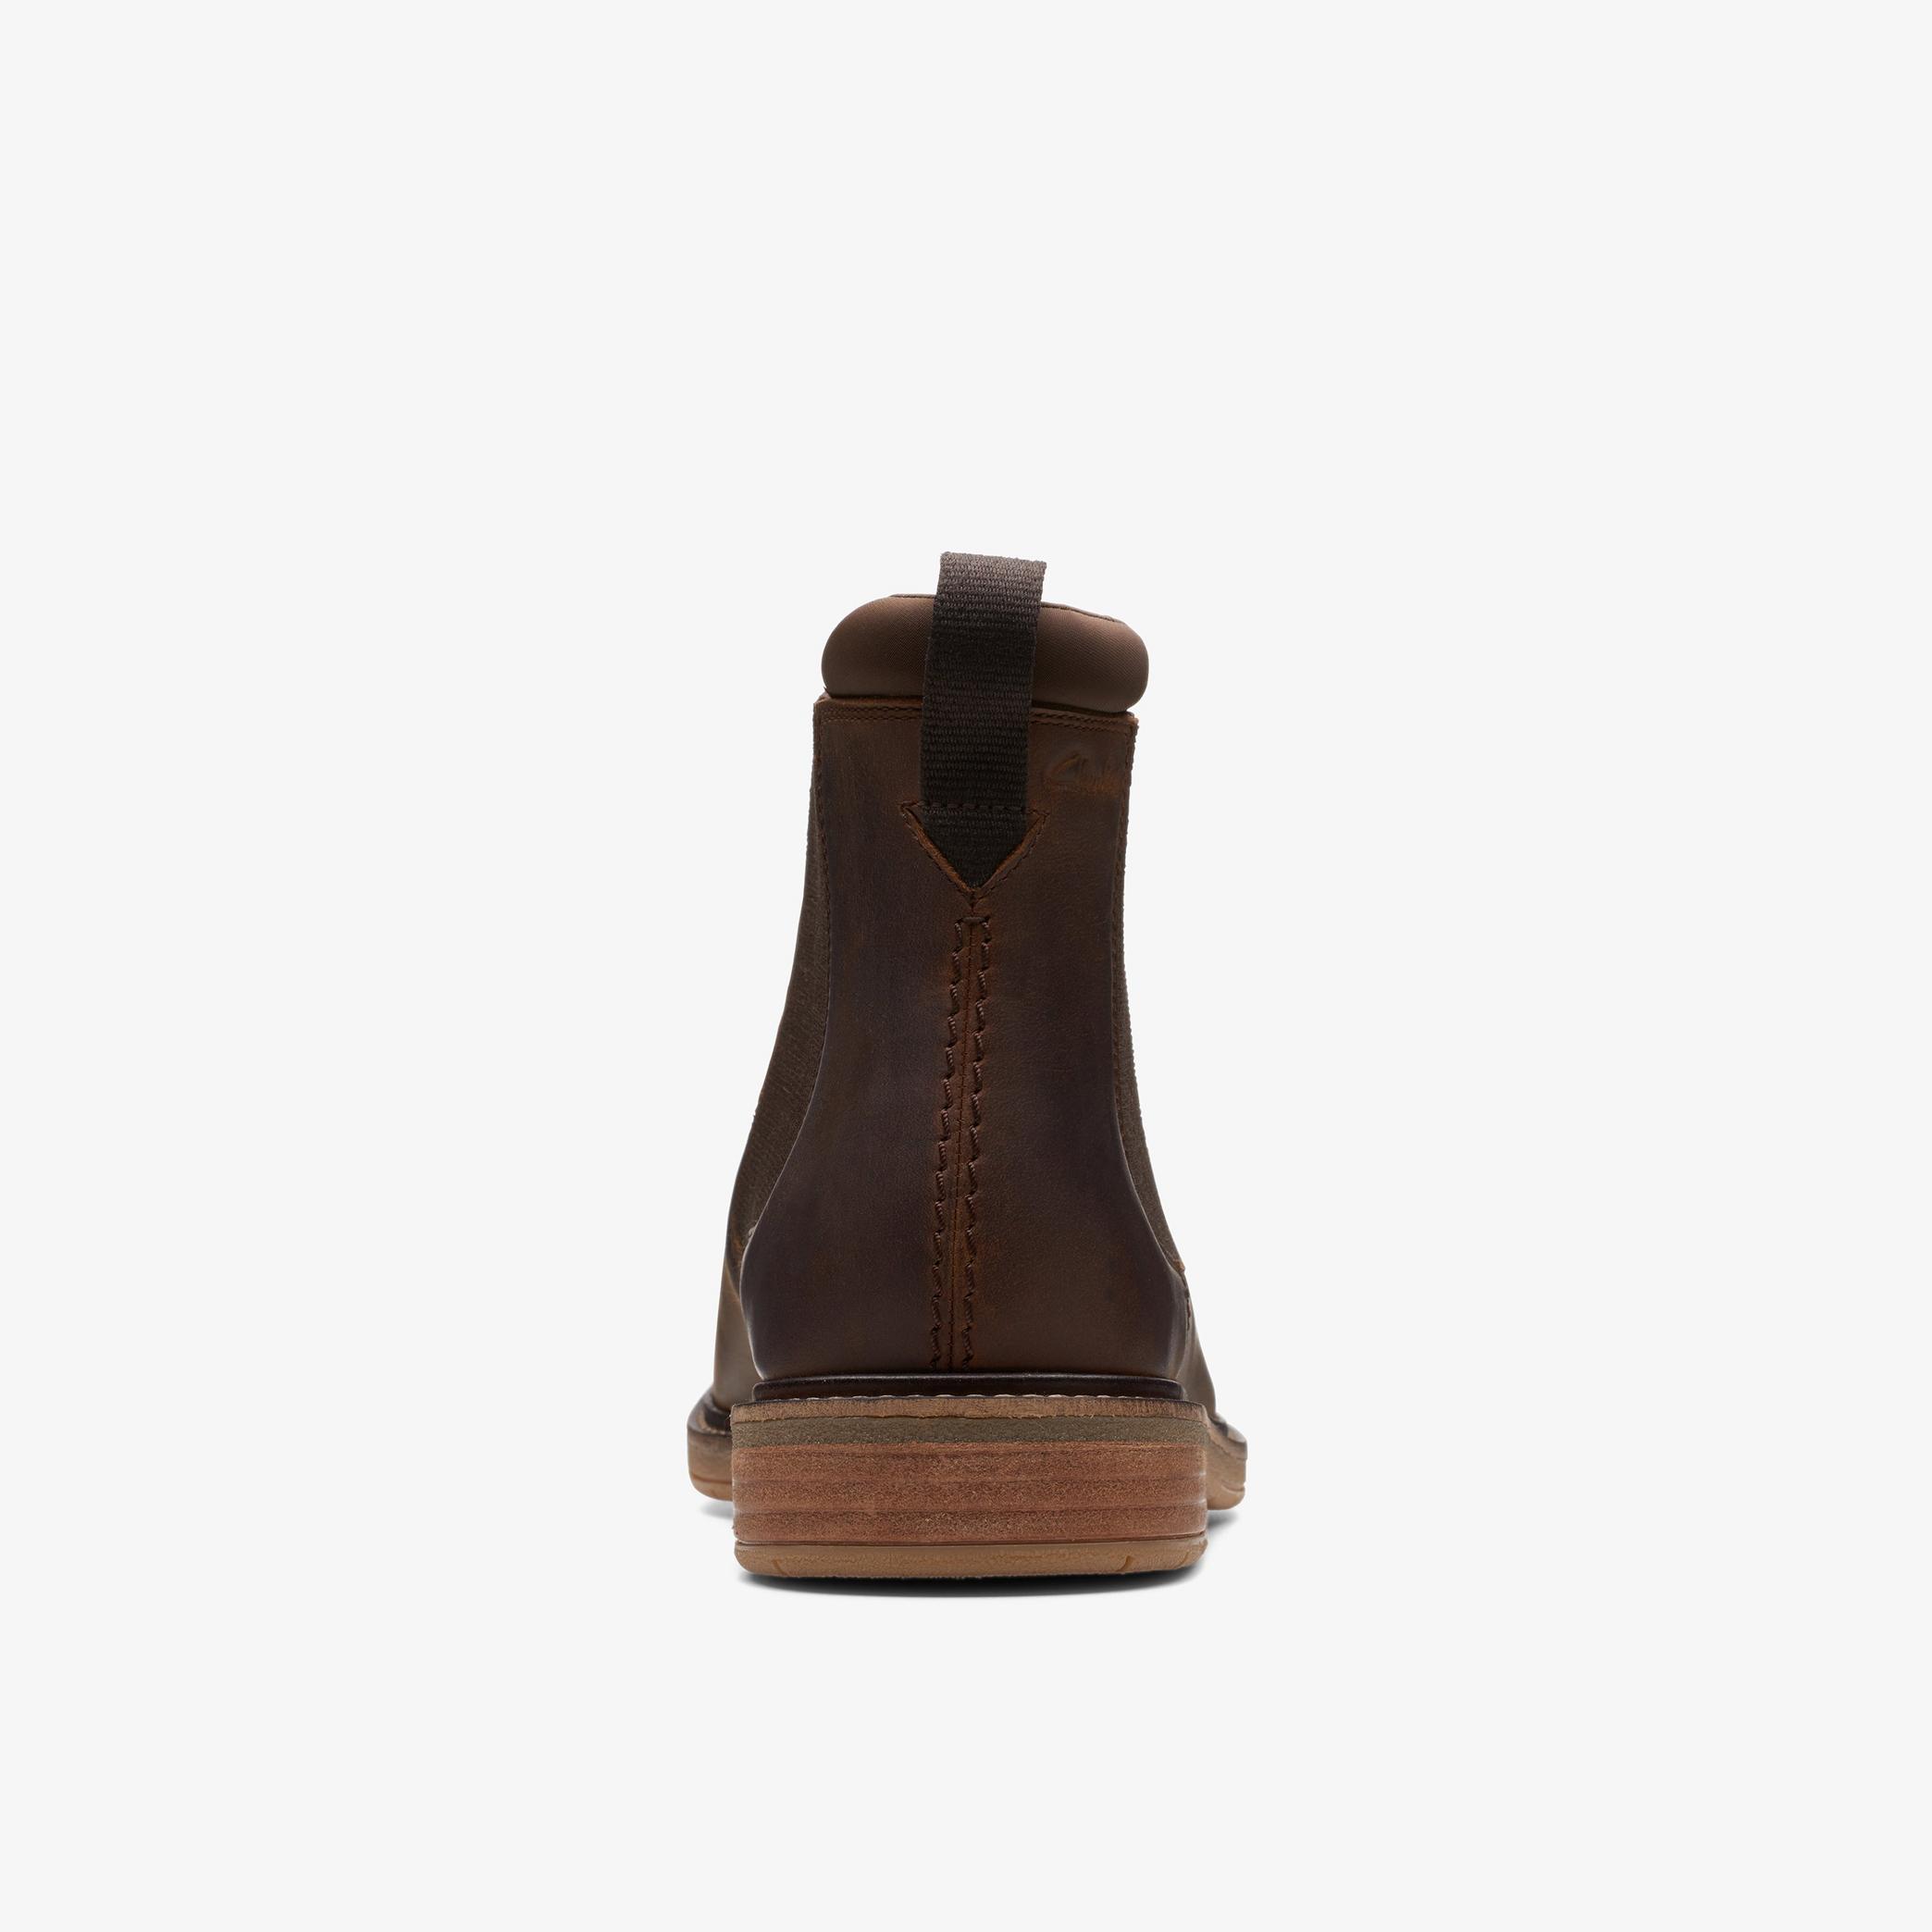 Clarkdale Hall Beeswax Leather Chelsea Boots, view 5 of 6